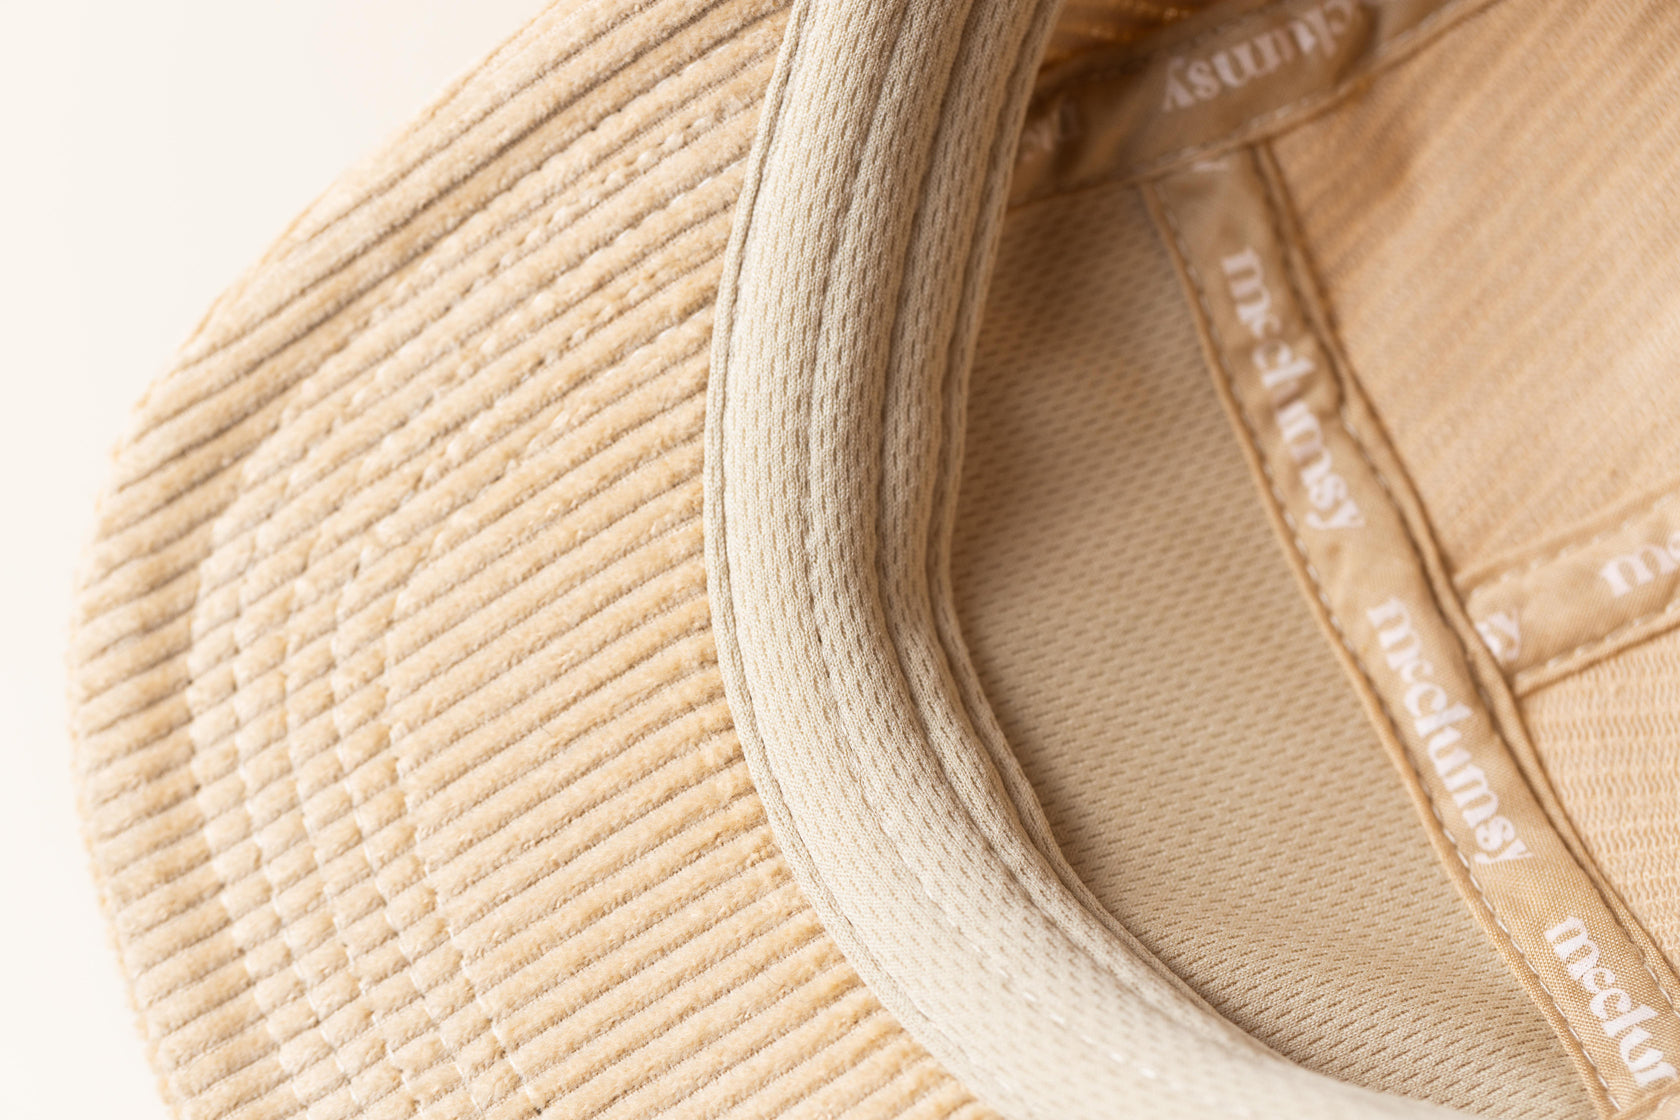 Inside view of Seam Tape and Sweatbanc in a McClumsy Thick Whale Light Tan 5 Panel Corduroy Hat